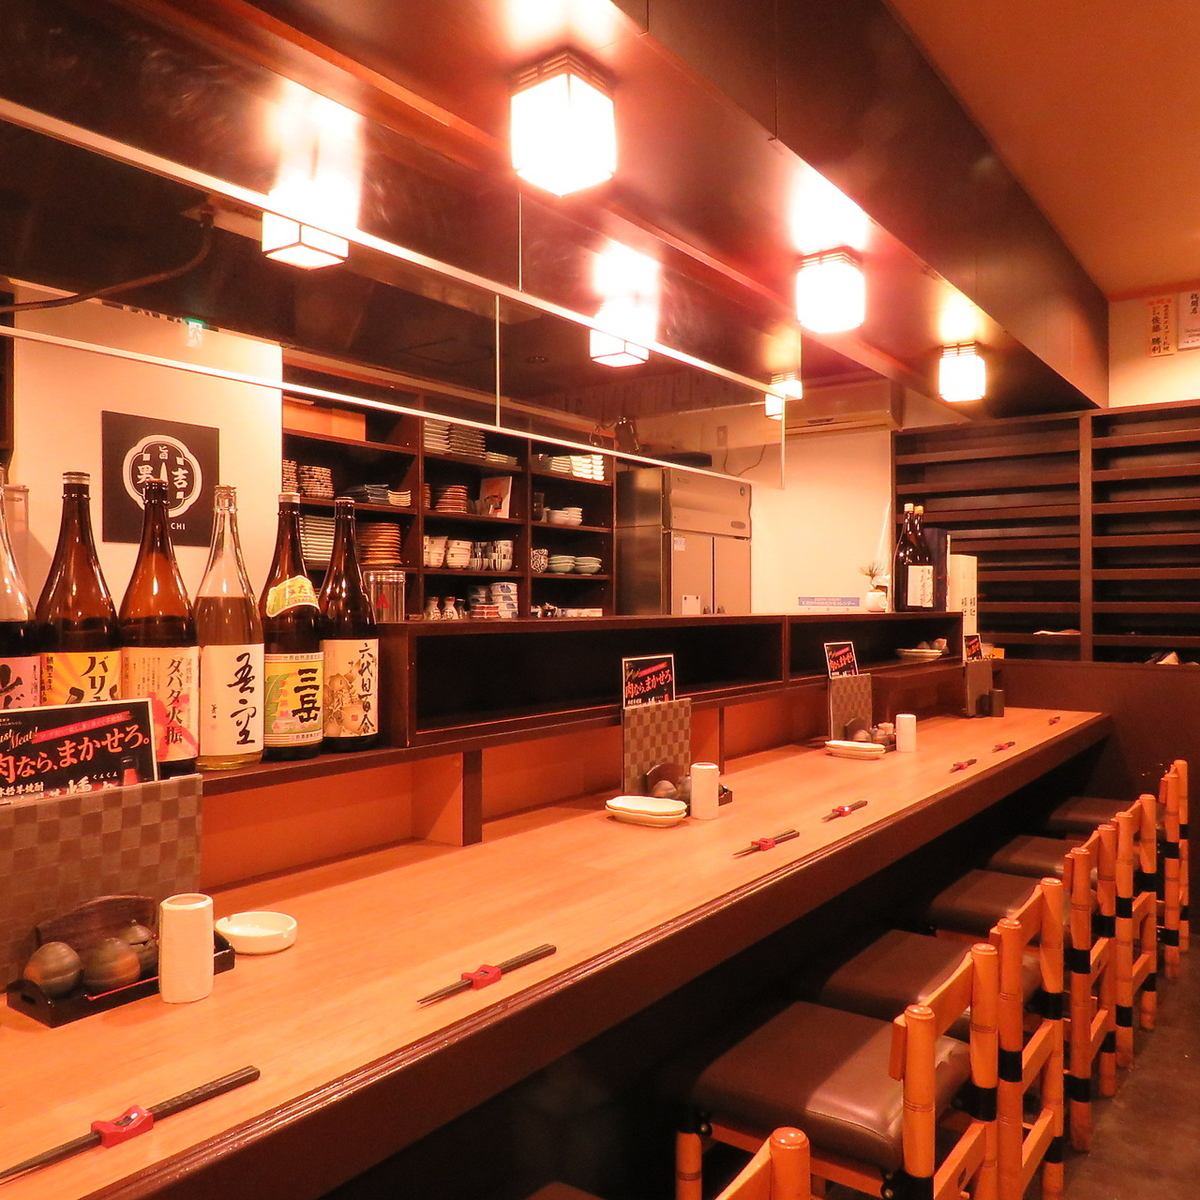 Counter seats are also available, and one person is welcome ♪